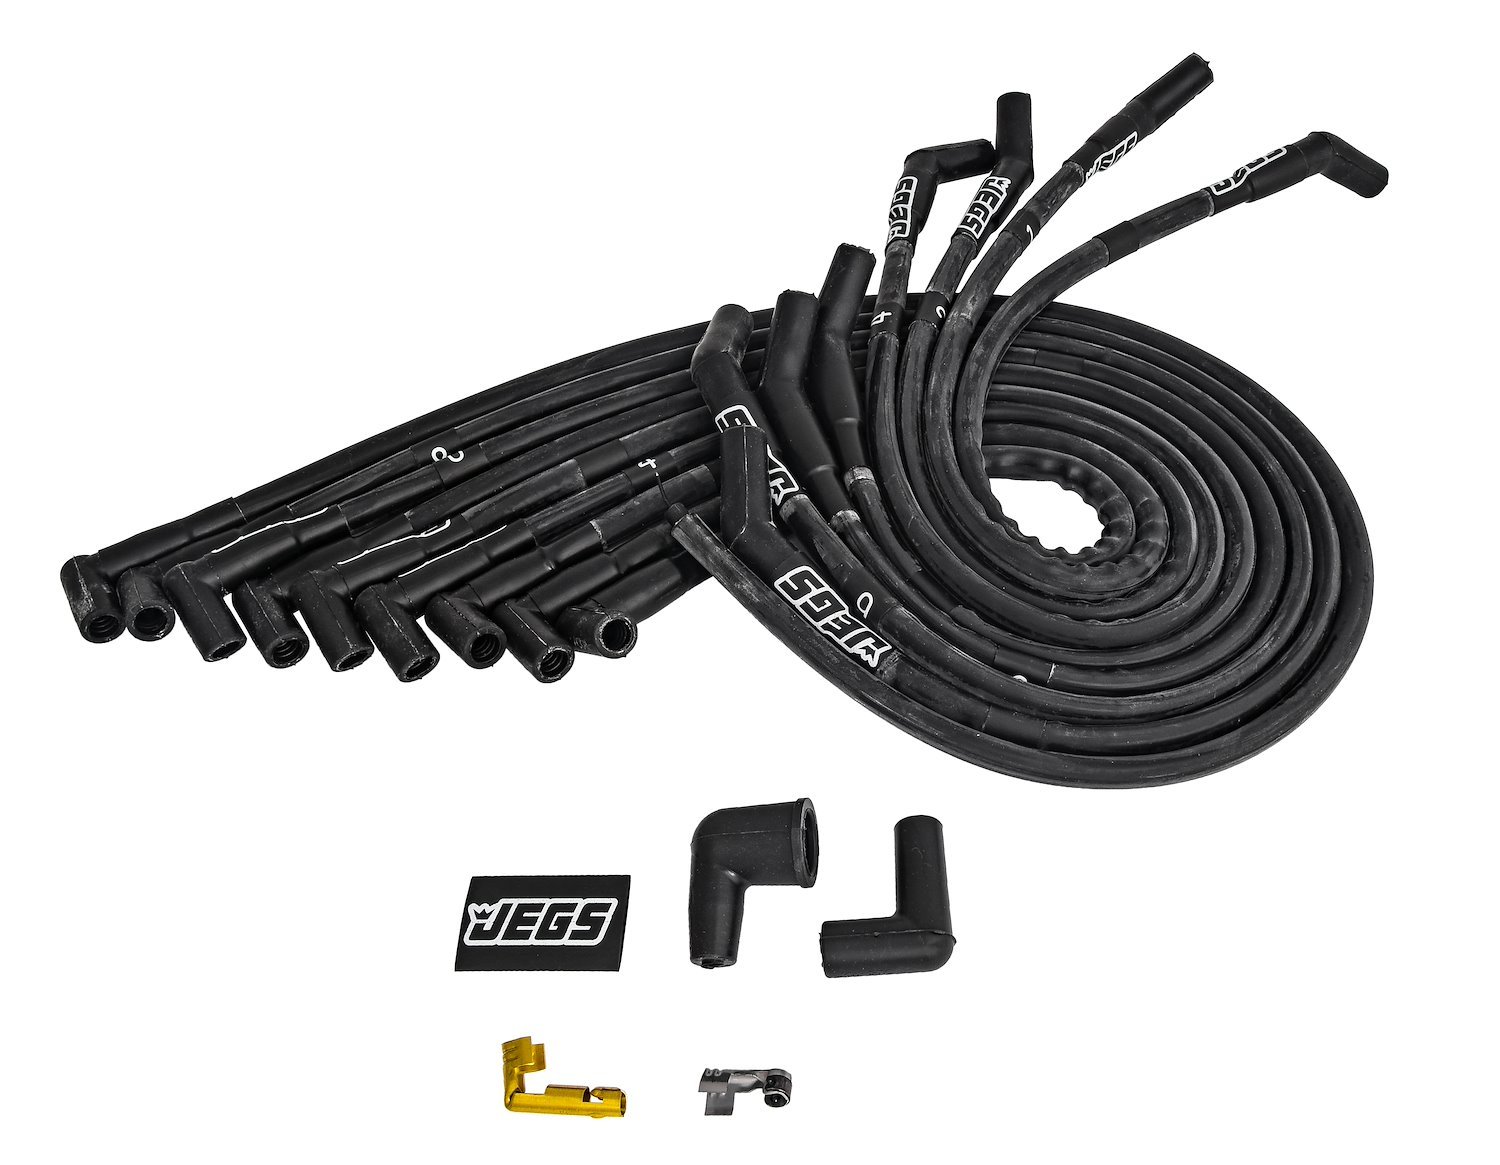 JEGS 8mm Hi-Temp Sleeved Spark Plug Wire Set for Big Block Ford 429 & 460  w/HEI, Under Header w/135-degree Boots [Black]